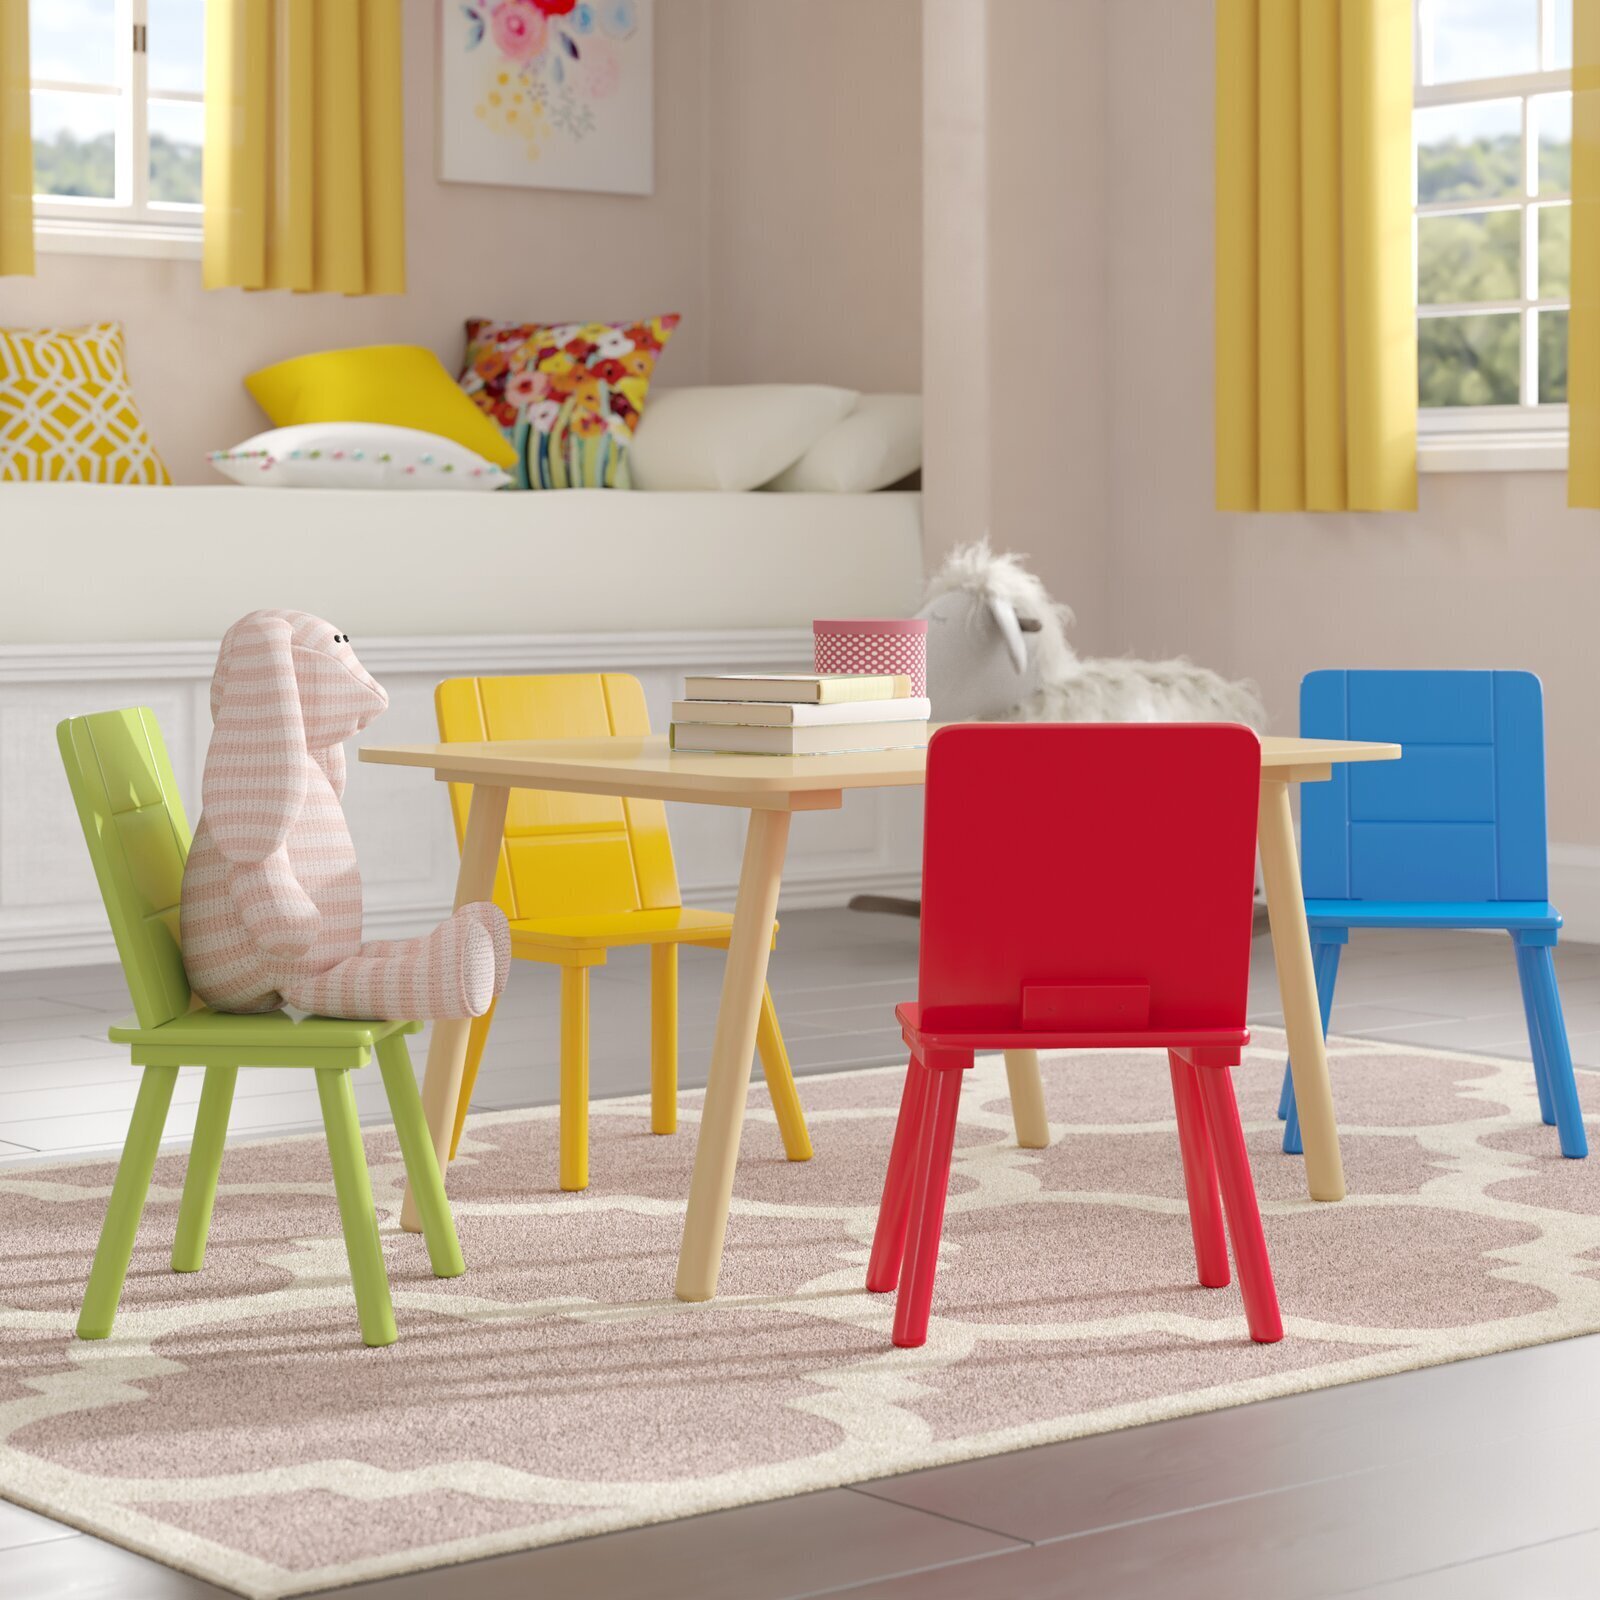 Melissa & Doug Kids Furniture Wooden Table & 4 Chairs Natural Table, Yellow, Blue, Red, Green Chairs Primary 